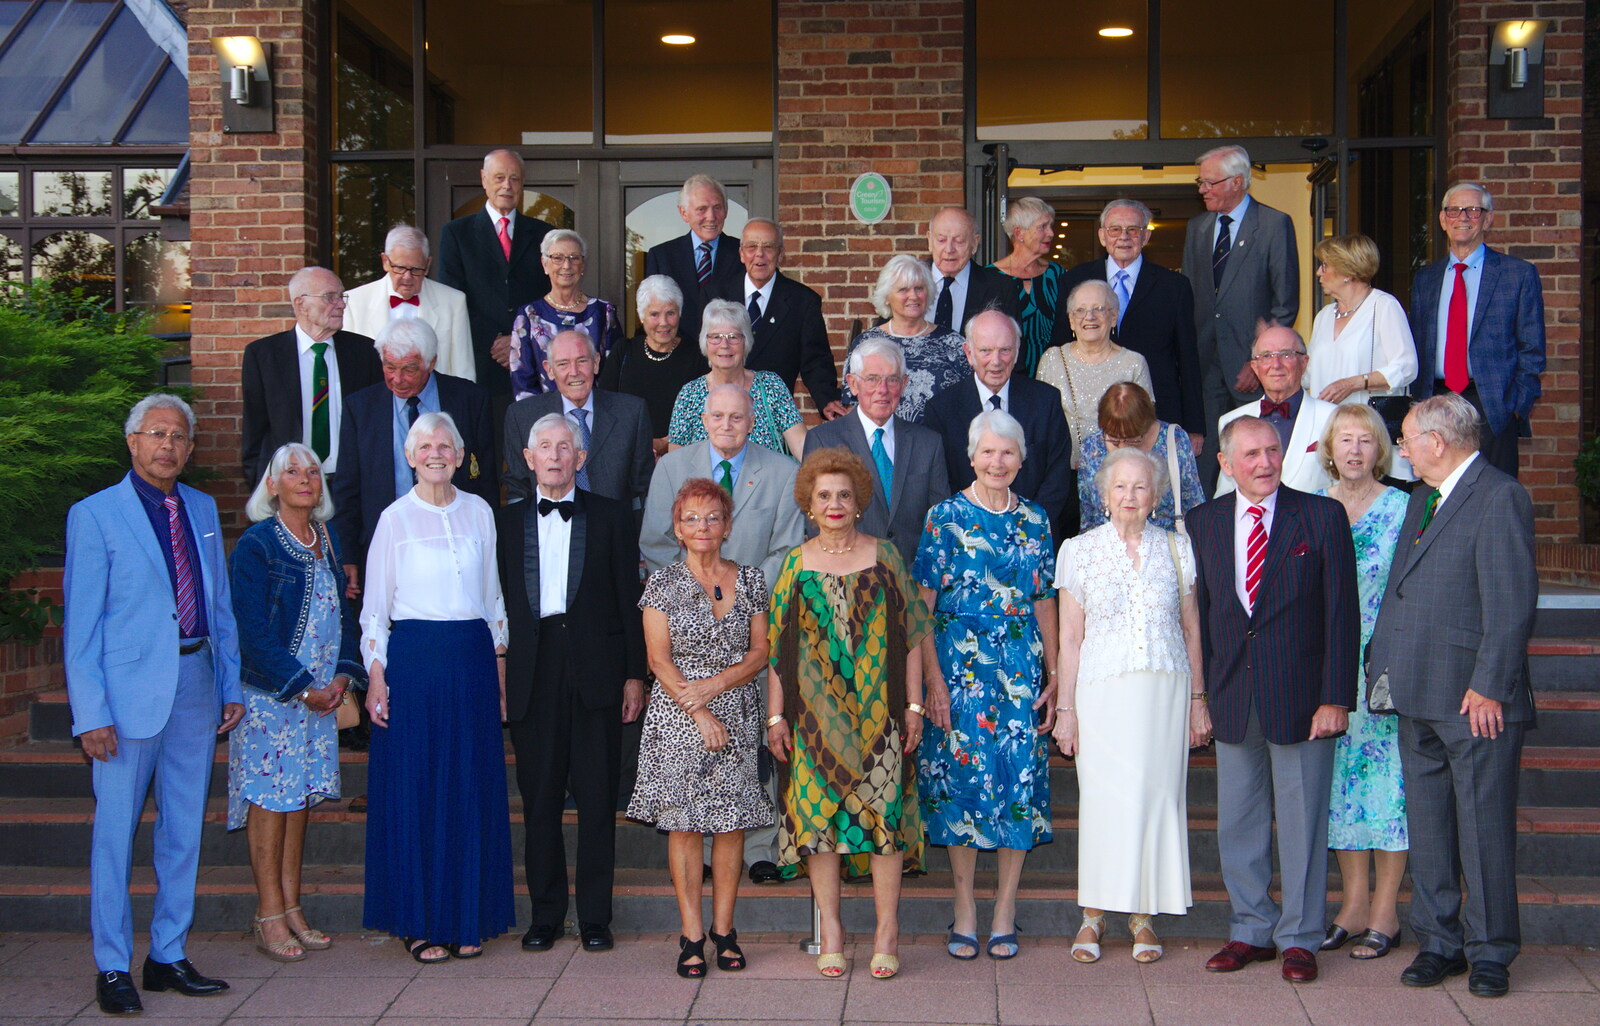 A group photo of the 69th Entry, plus partners from Kenilworth Castle and the 69th Entry Reunion Dinner, Stratford, Warwickshire - 14th September 2019